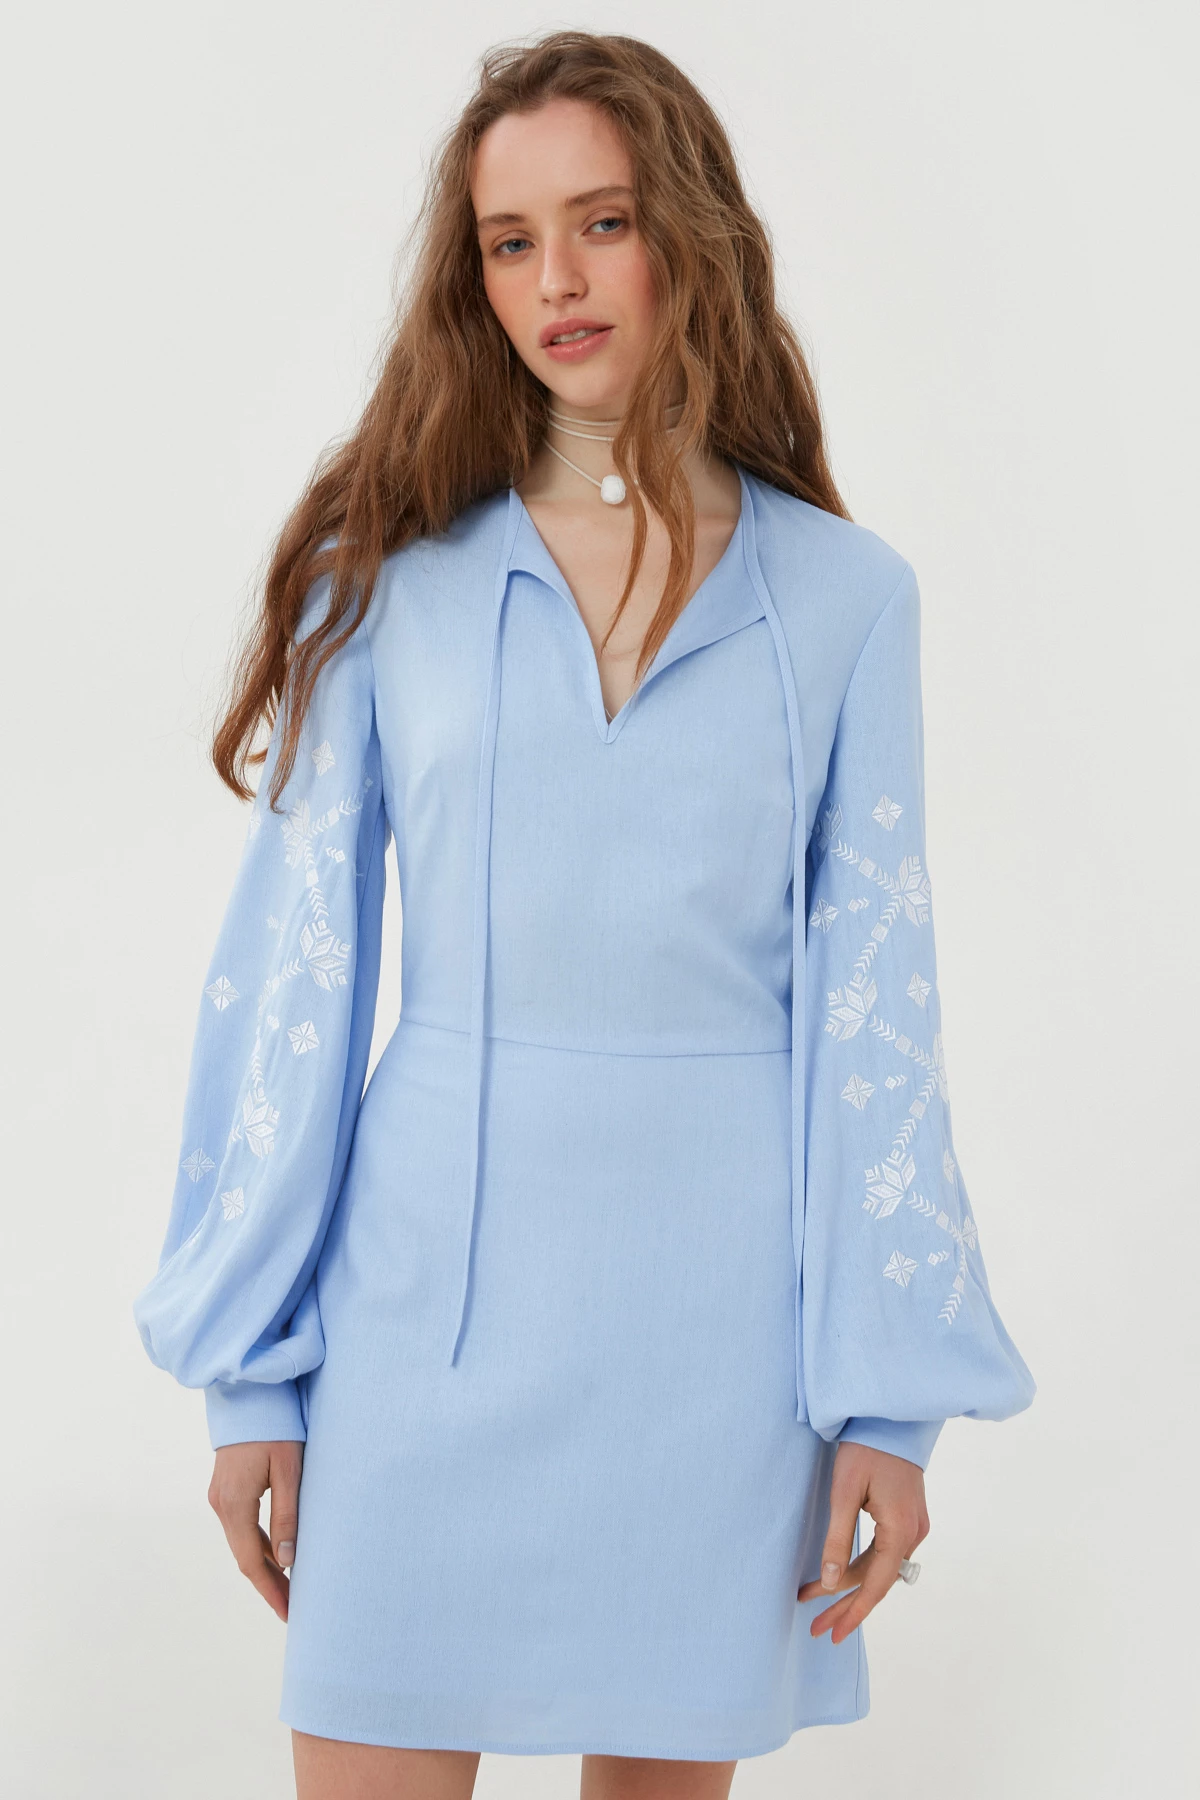 Embroidered short dress "Barvinok" with blue linen, photo 1